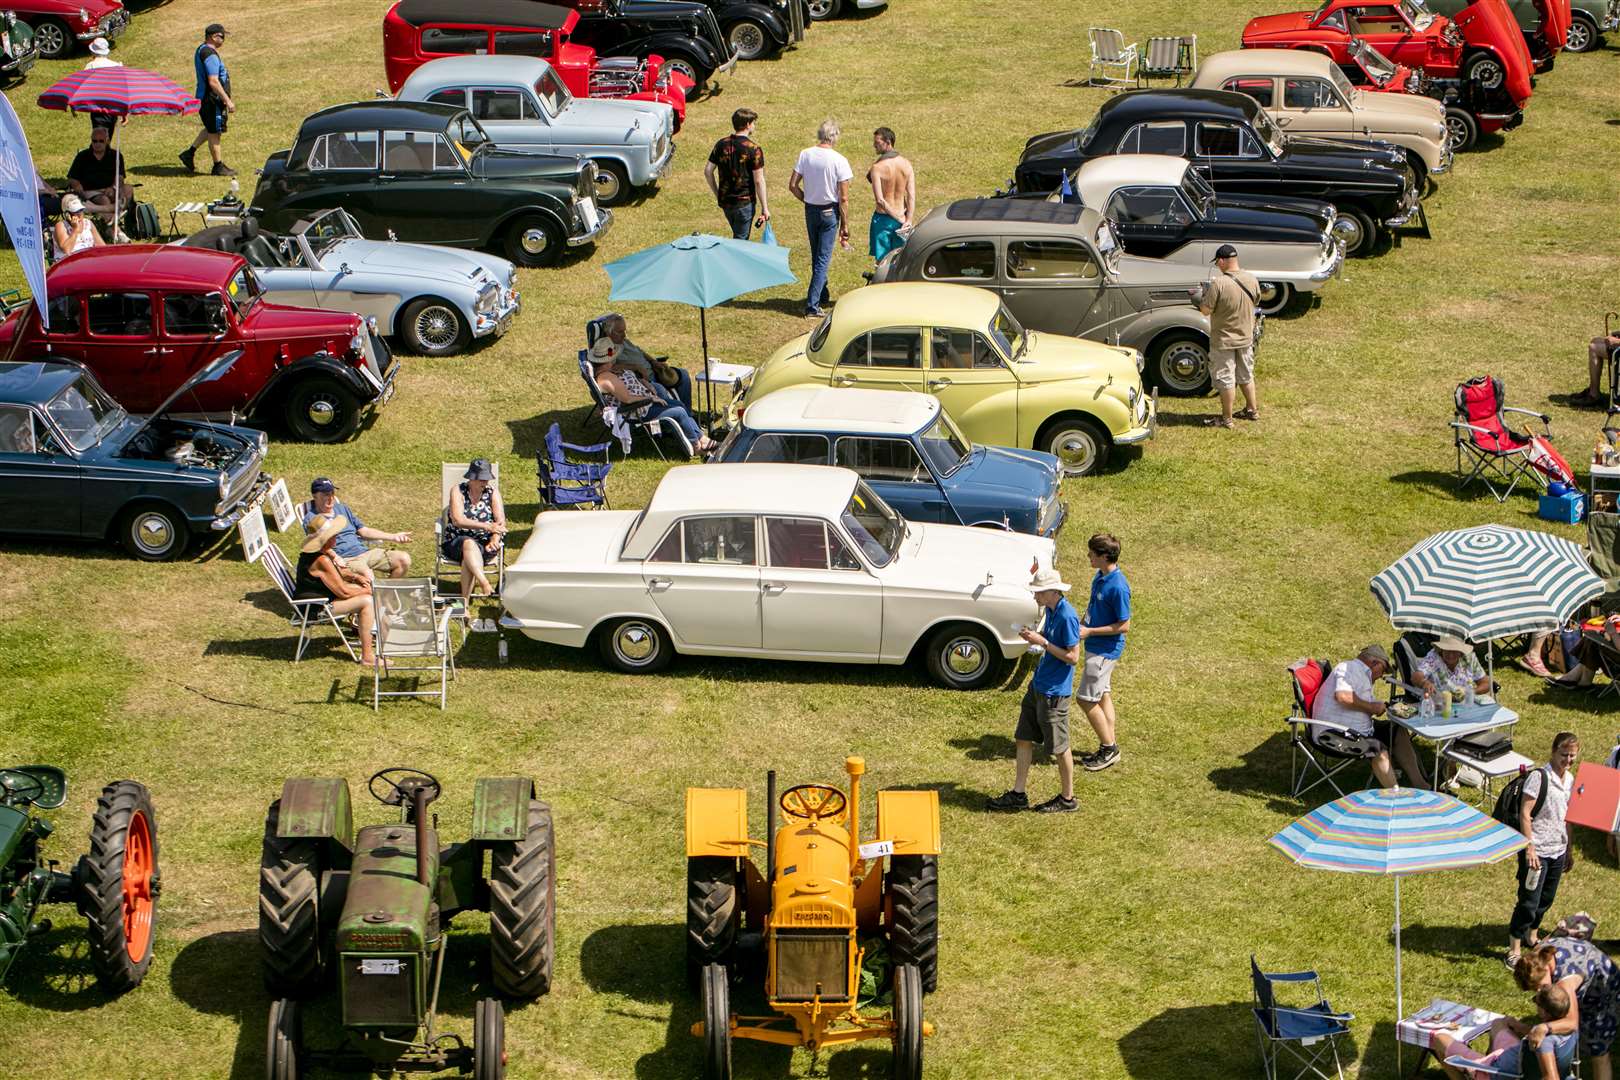 Stop off at the classic car show and check out the vintage vehicles. Picture: Thomas Alexander